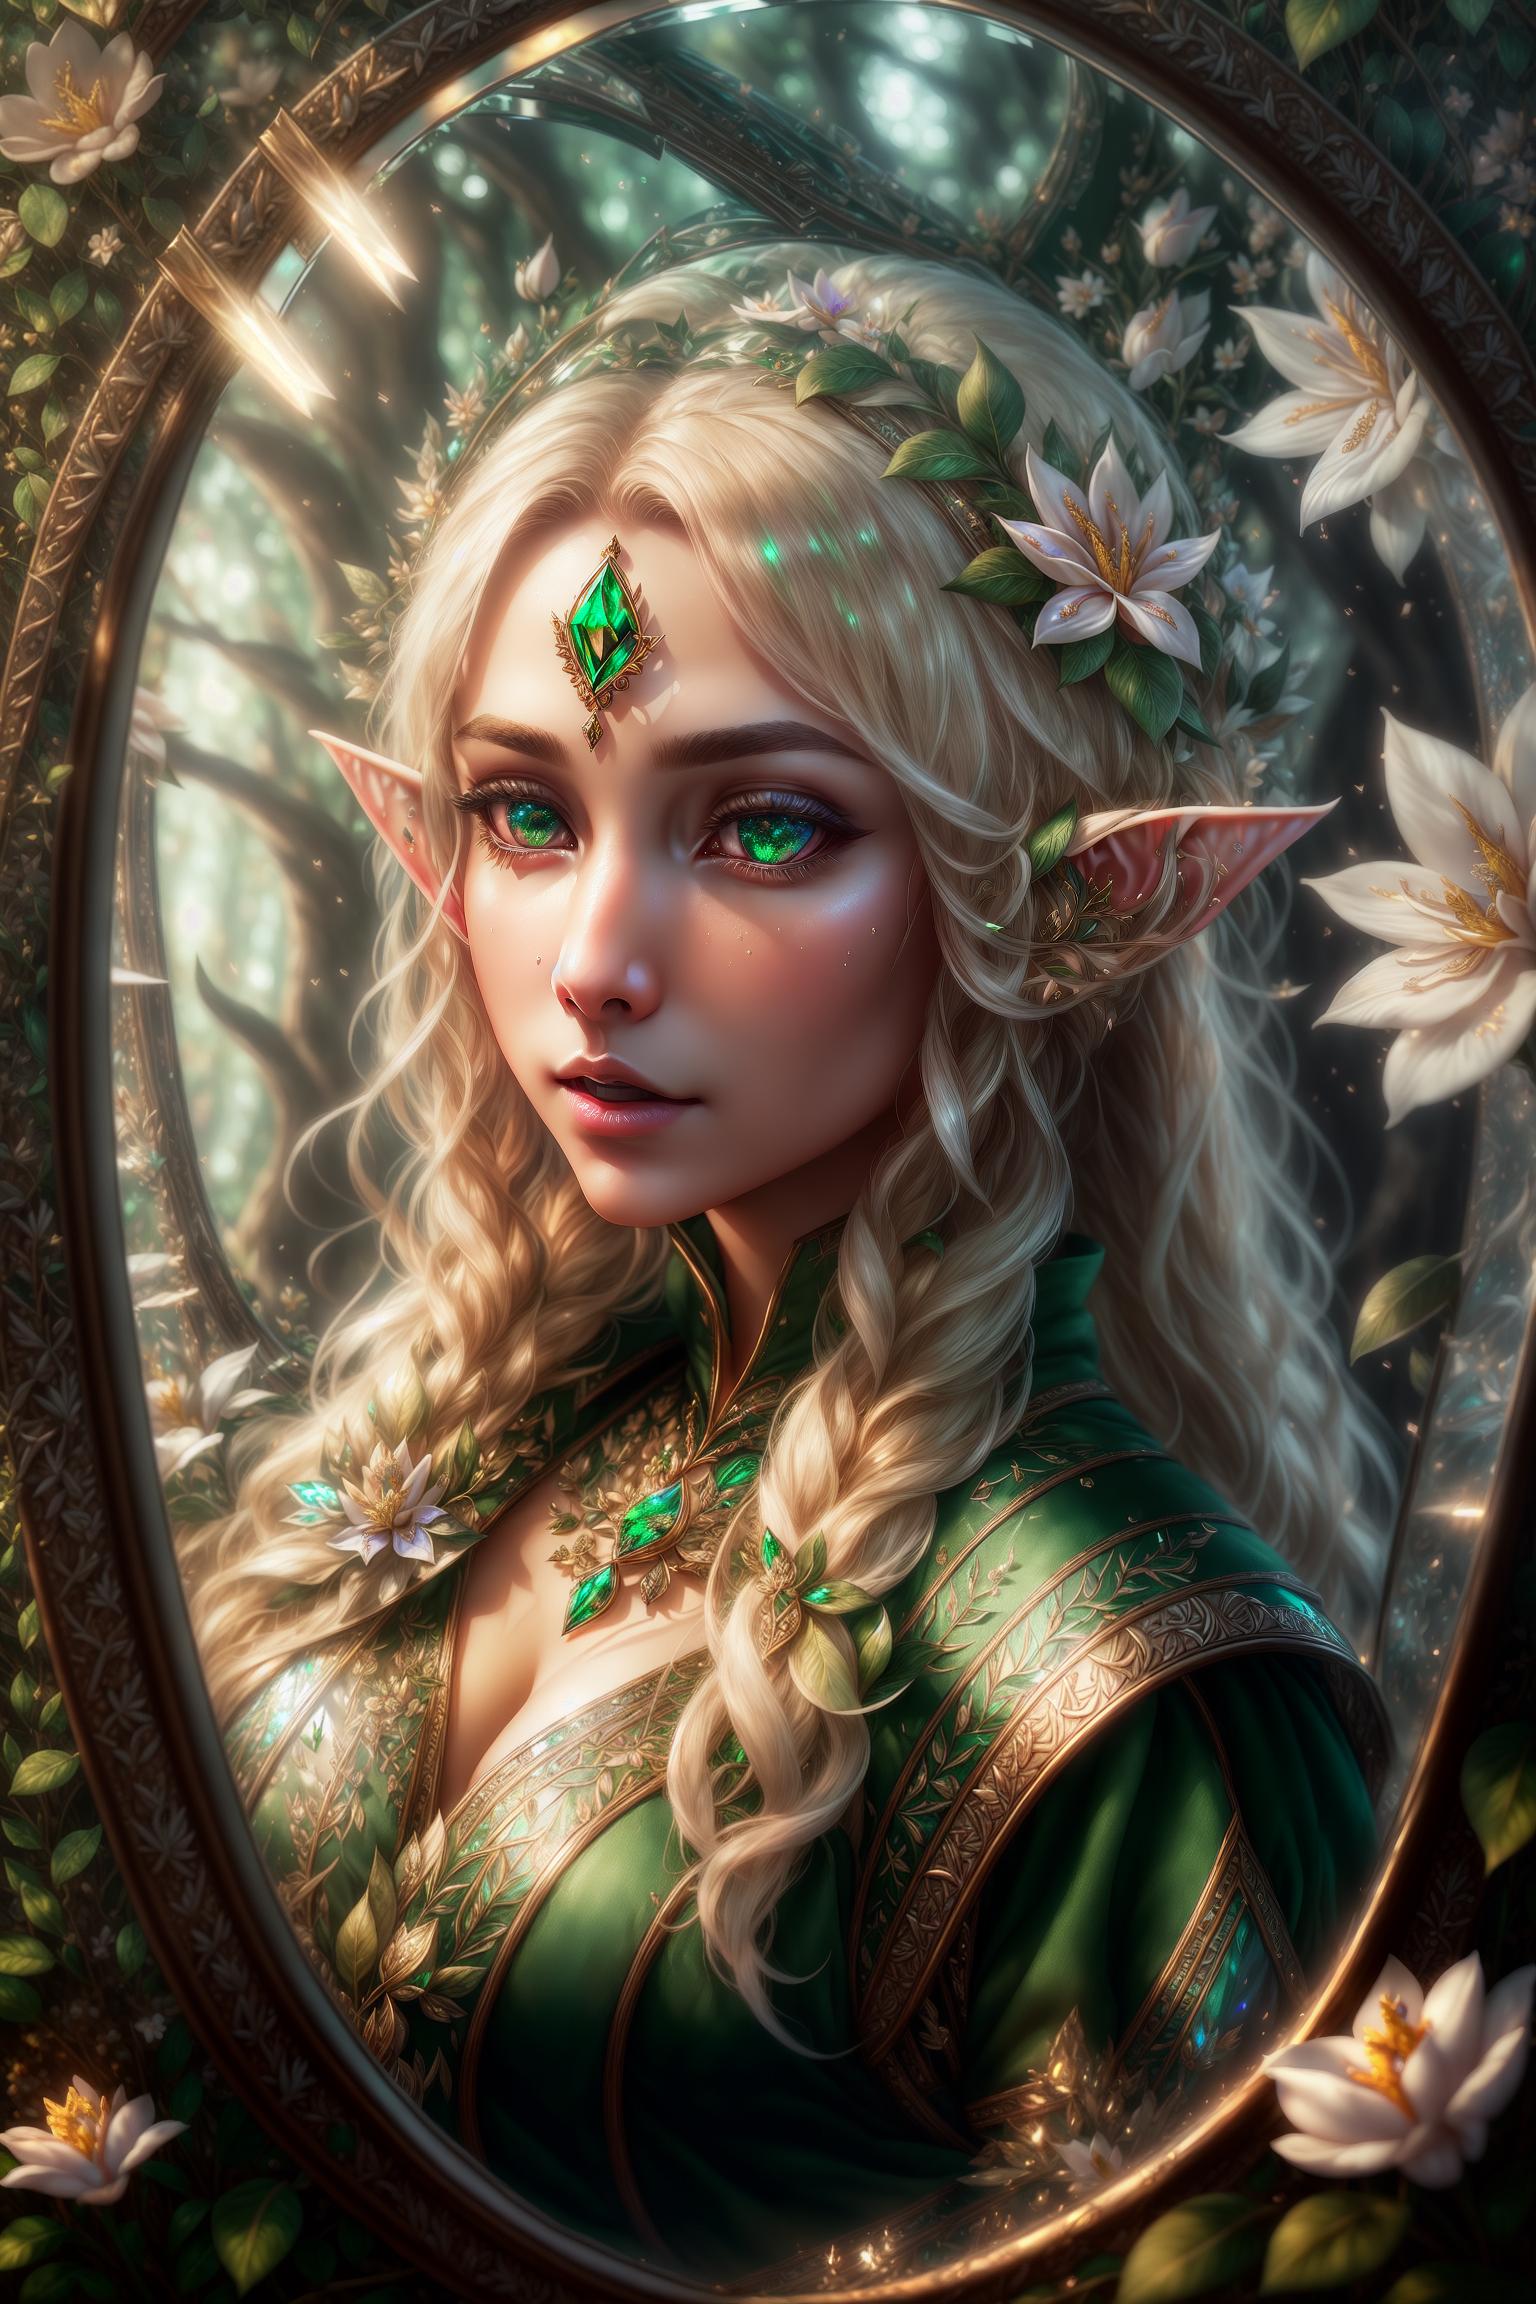  masterpiece,(bestquality),highlydetailed,(beautiful elf:1.5),(narcissistic expression:1.2),(lifedrain:1.3),{reflection in the mirror: trapped in the mirror:1.2},(ancient mirror:1.5),(attracted person:0.8),{dark environment: mysterious atmosphere:1.1},(mirror reflection:1.3),{elf elements: forest: mushrooms: flowers:1.2},(forest elements:1.5),(flower elements:1.5) hyperrealistic, full body, detailed clothing, highly detailed, cinematic lighting, stunningly beautiful, intricate, sharp focus, f/1. 8, 85mm, (centered image composition), (professionally color graded), ((bright soft diffused light)), volumetric fog, trending on instagram, trending on tumblr, HDR 4K, 8K